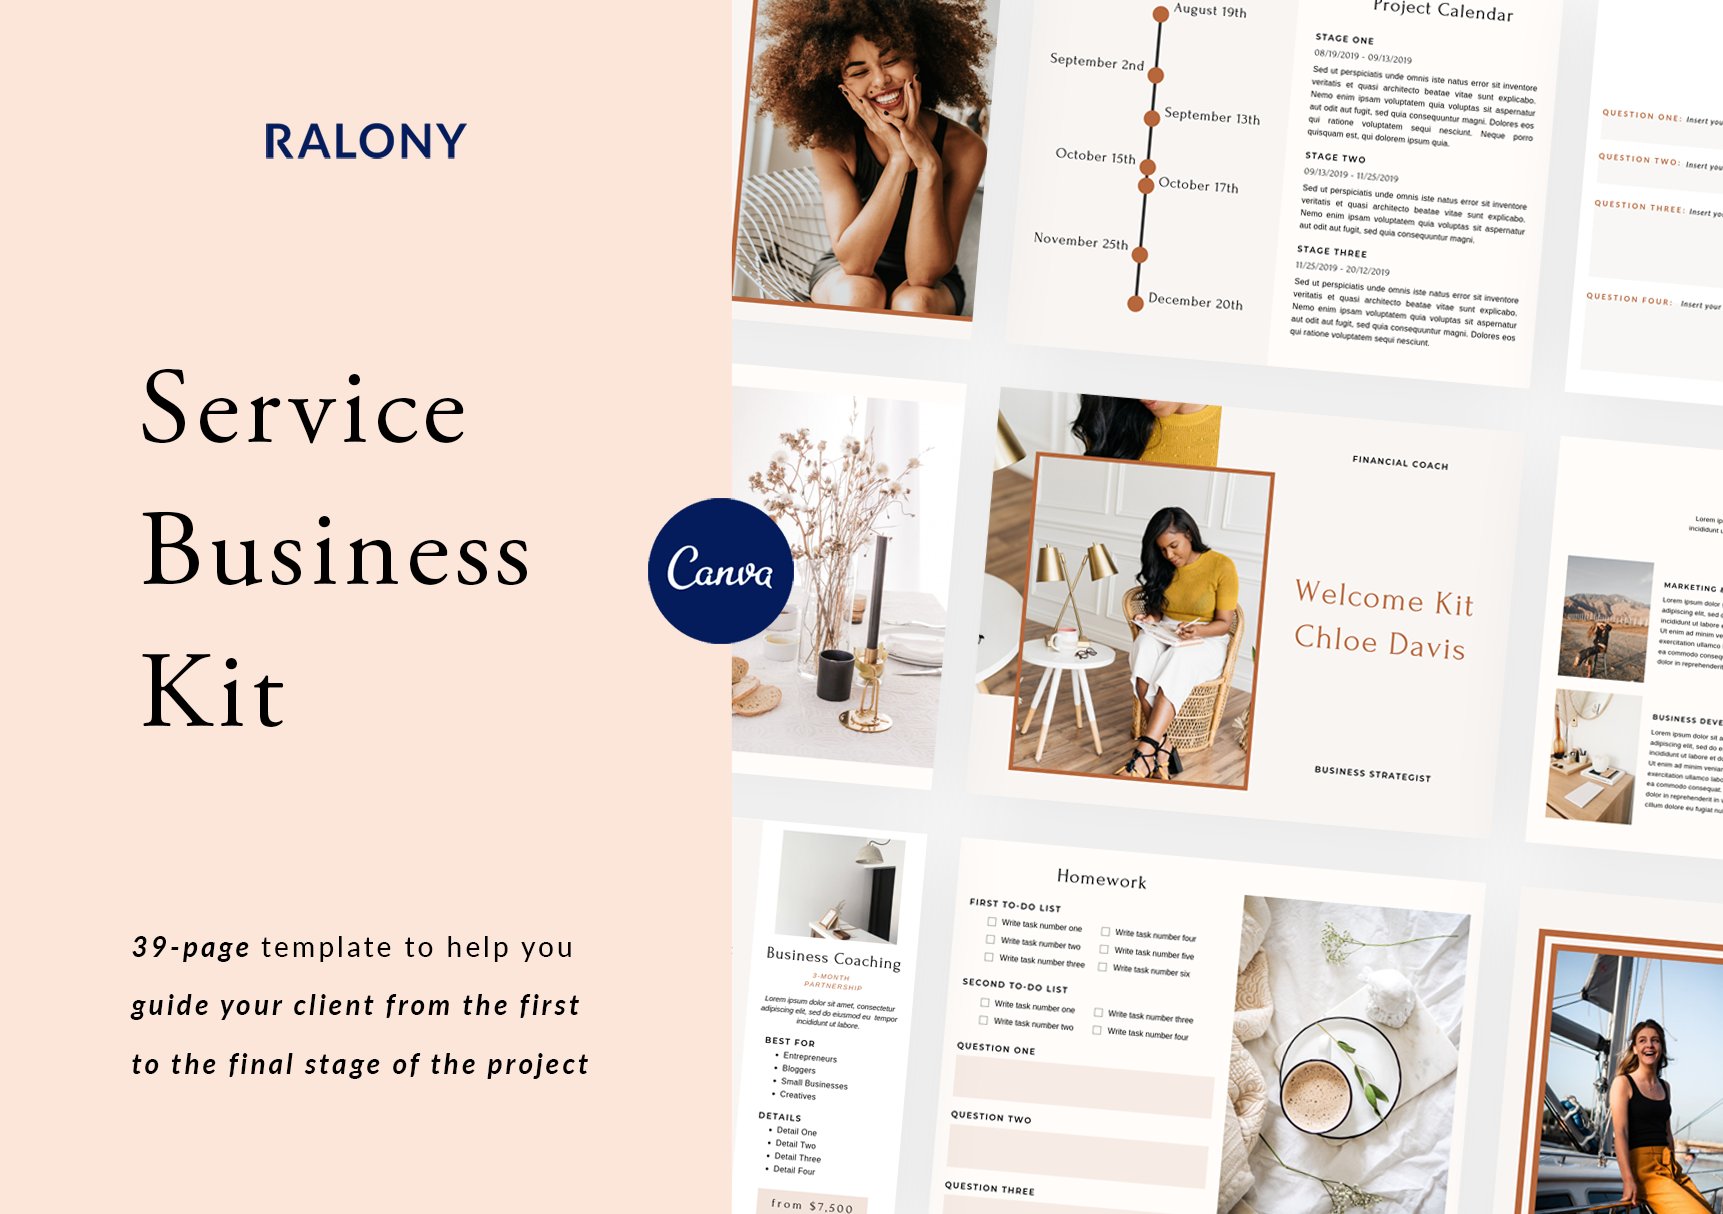 Service-Based Business Kit cover image.